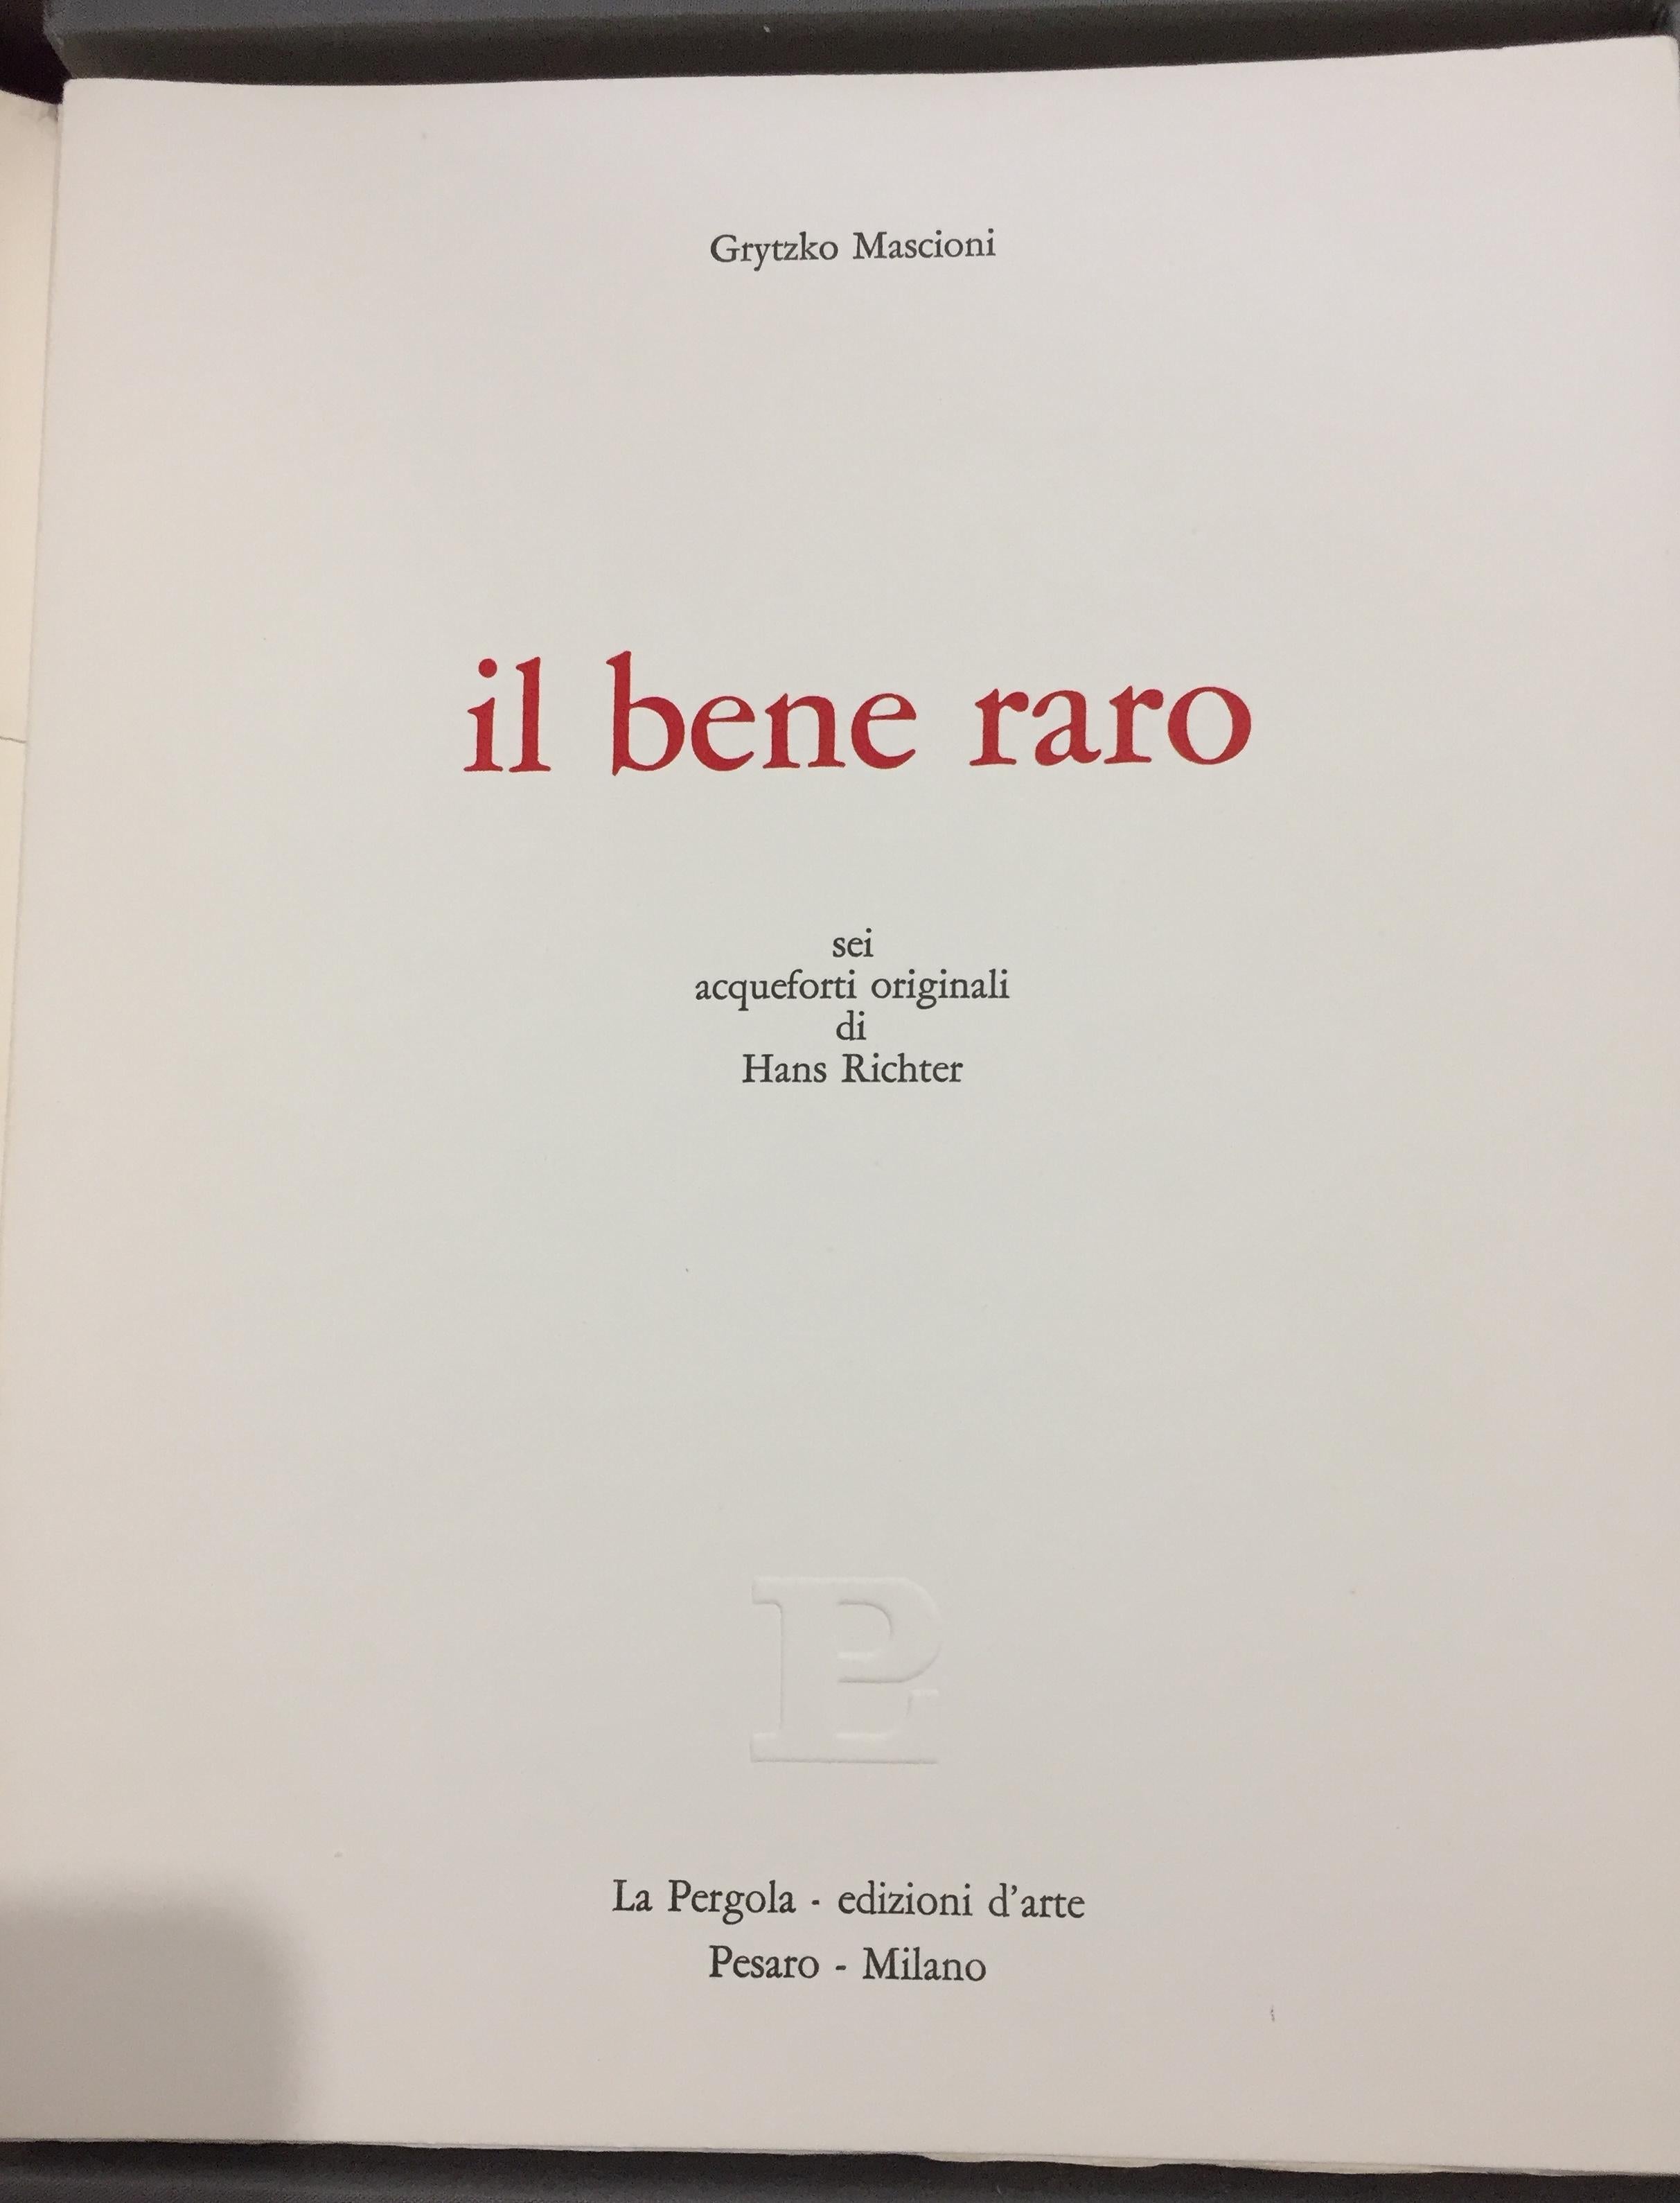 Il Bene Raro - Rare Book illustrated by Hans Richter - 1970 For Sale 3